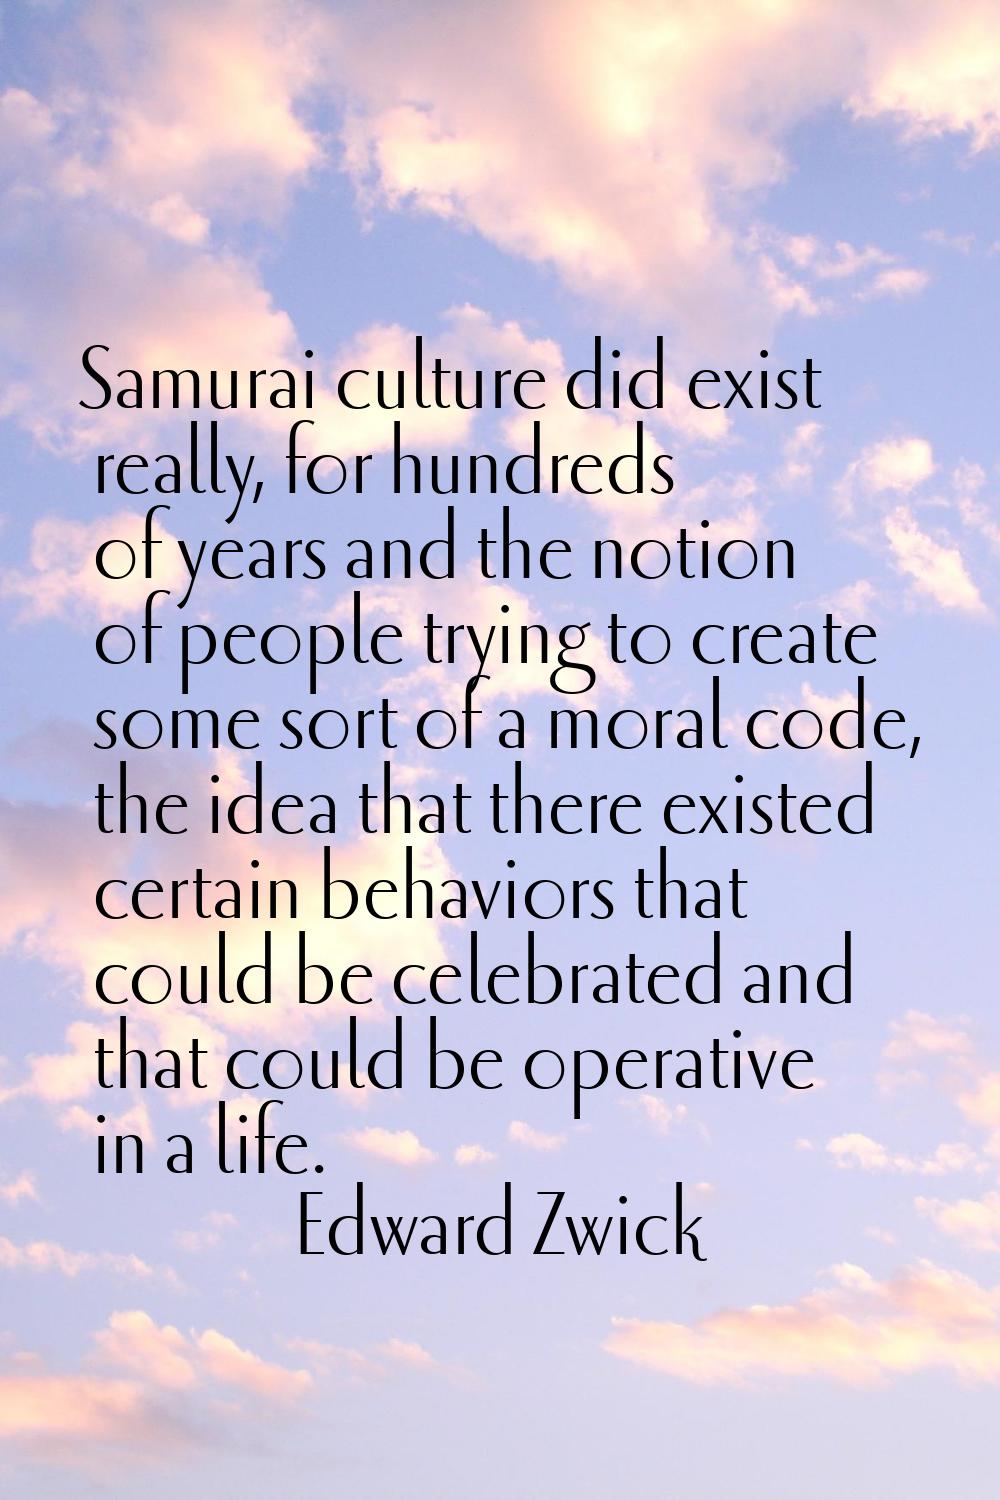 Samurai culture did exist really, for hundreds of years and the notion of people trying to create s